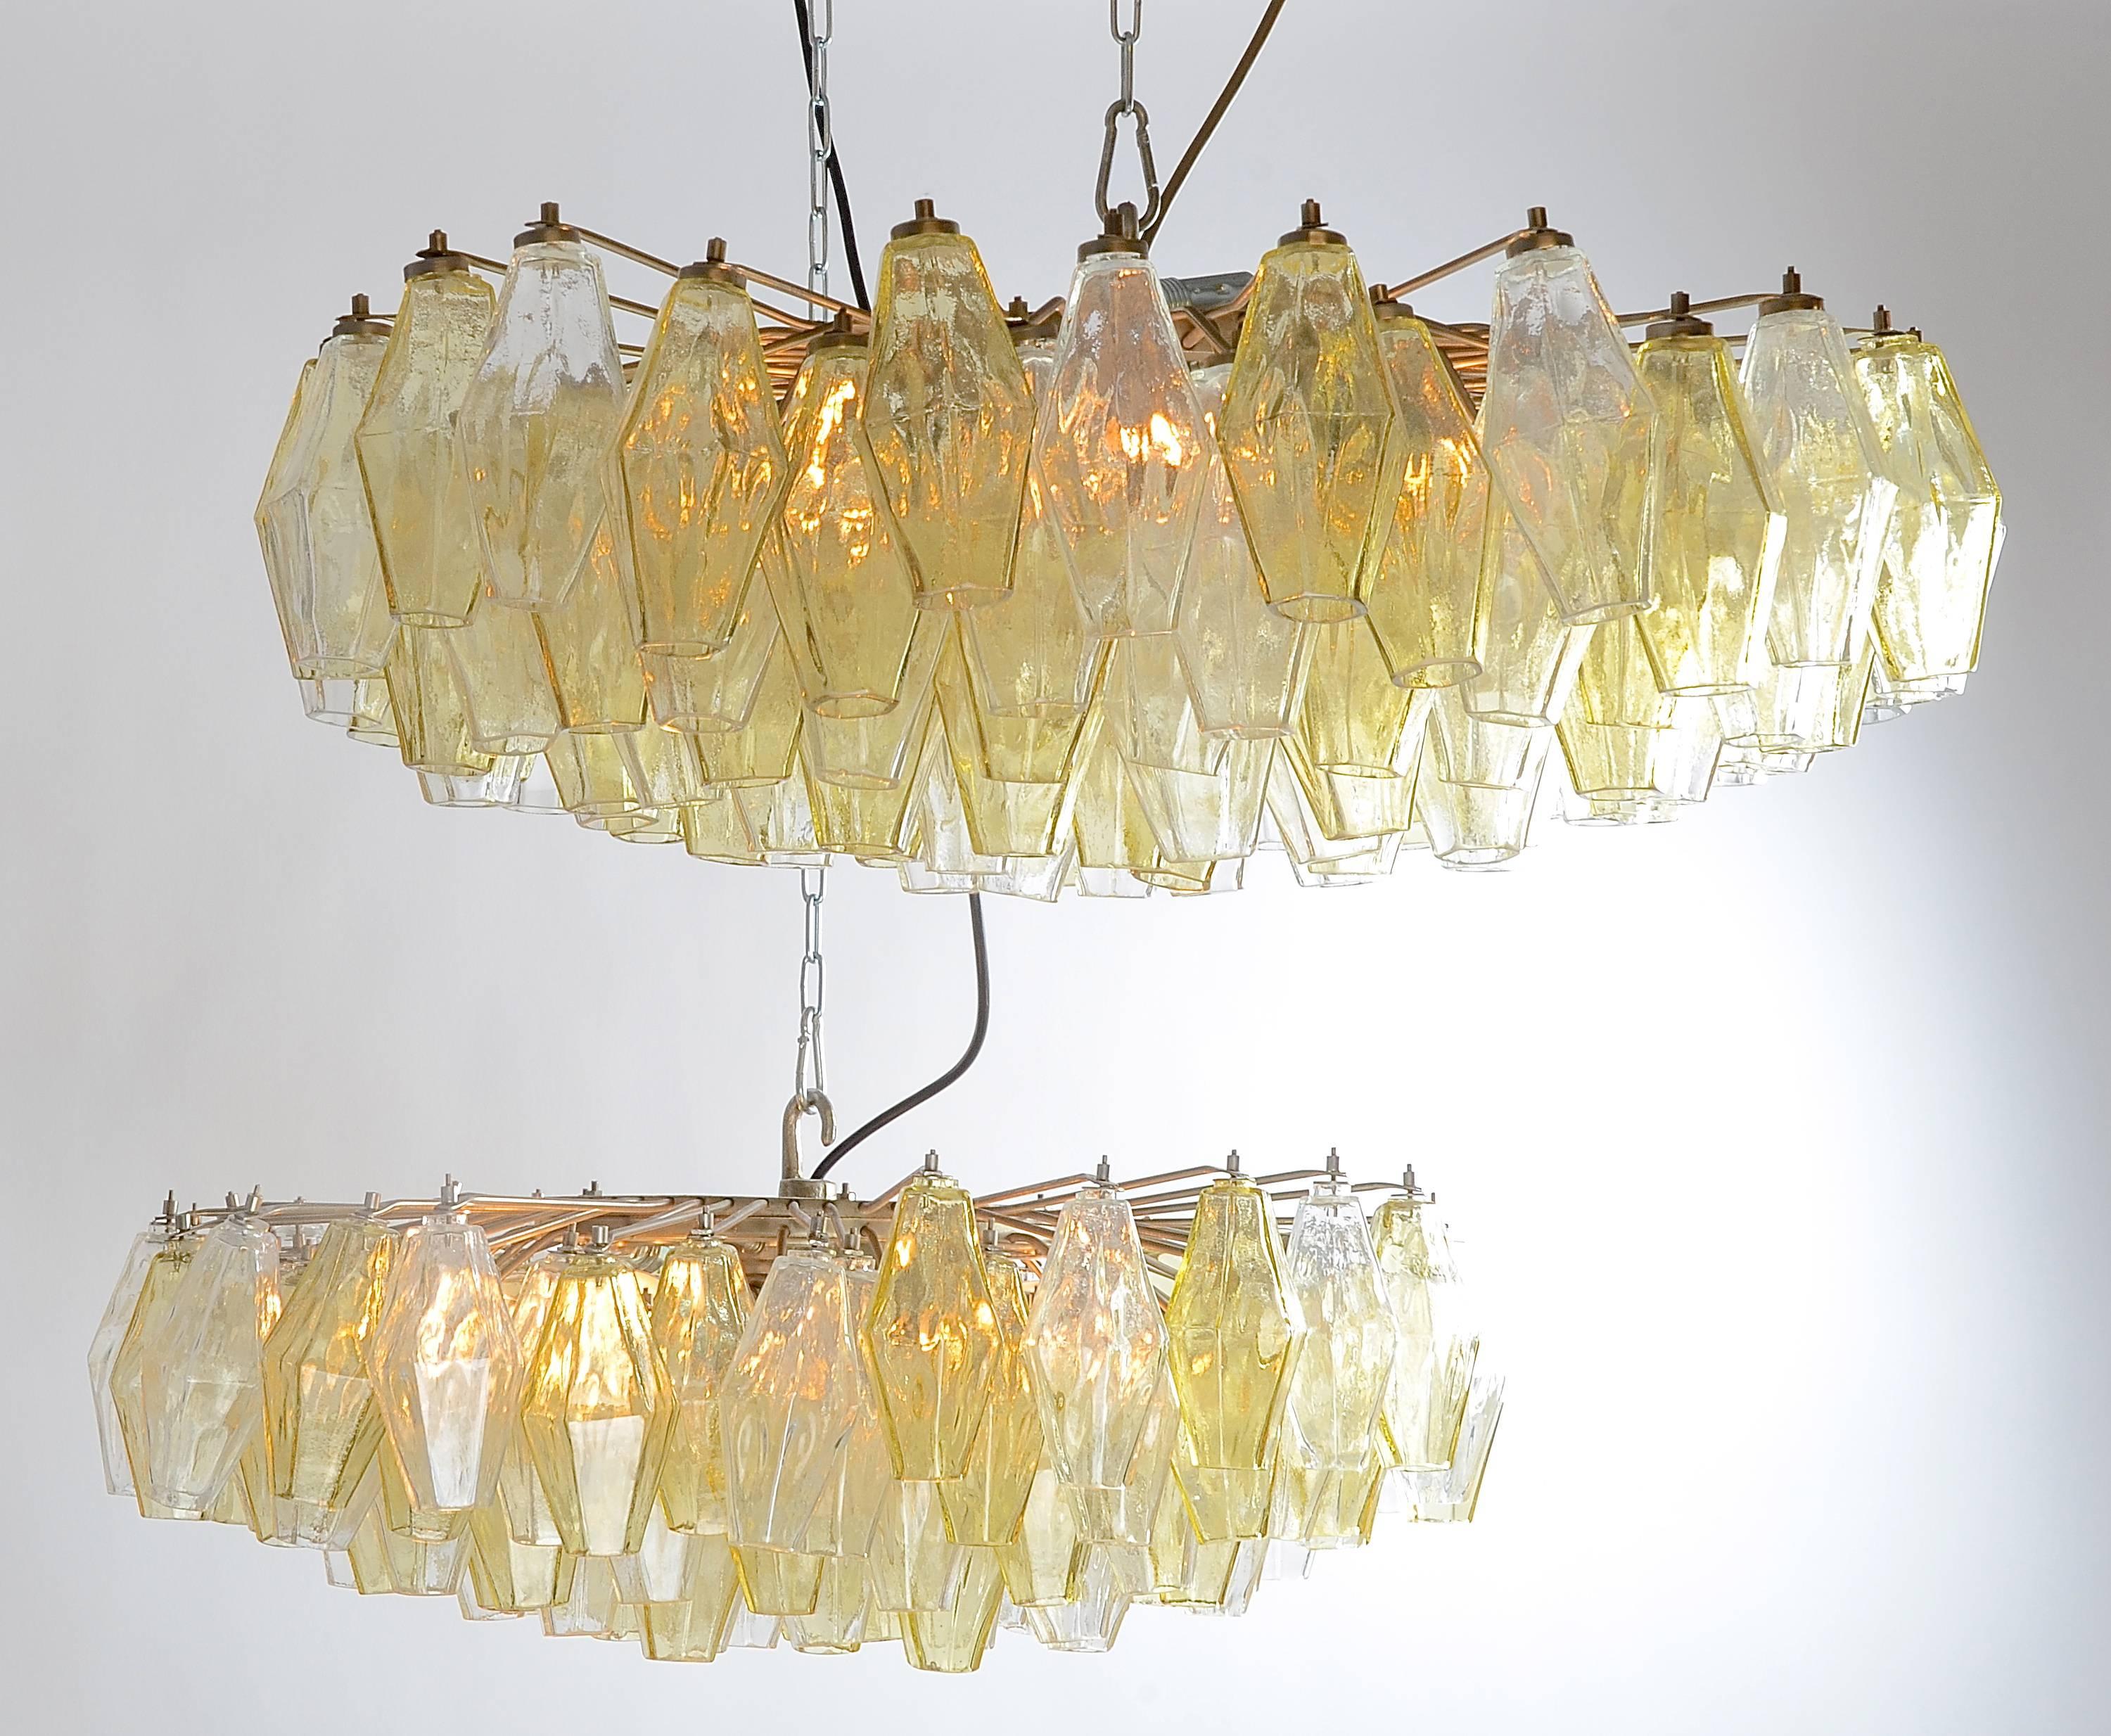 A pair of suspension lamps, model Poliedri in yellow and clear transparent glass. Designed by Carlo Scarpa for Venini. Marked 